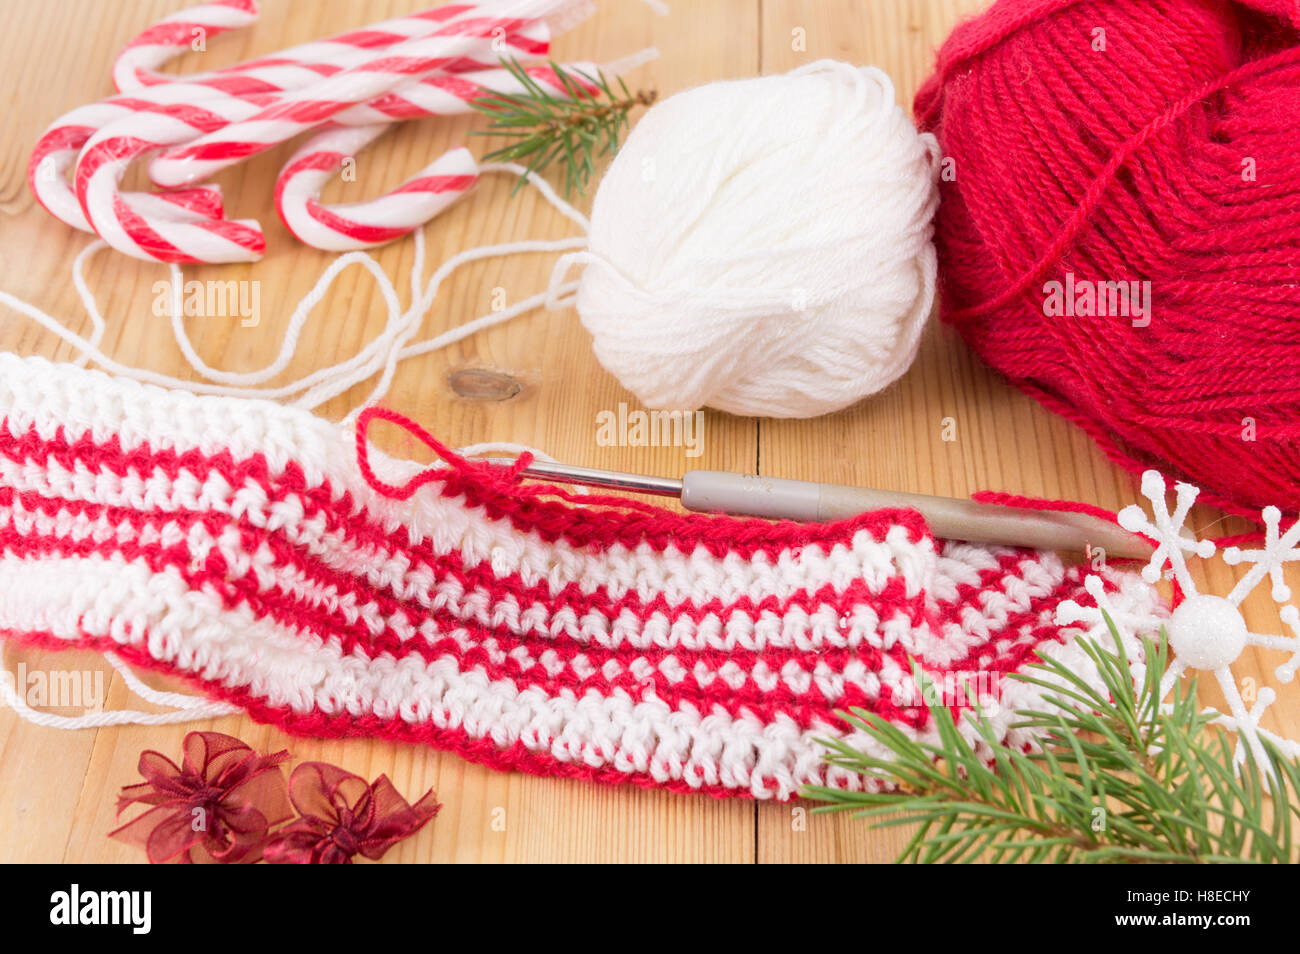 Crocheting Christmas winter red and white sweater Stock Photo